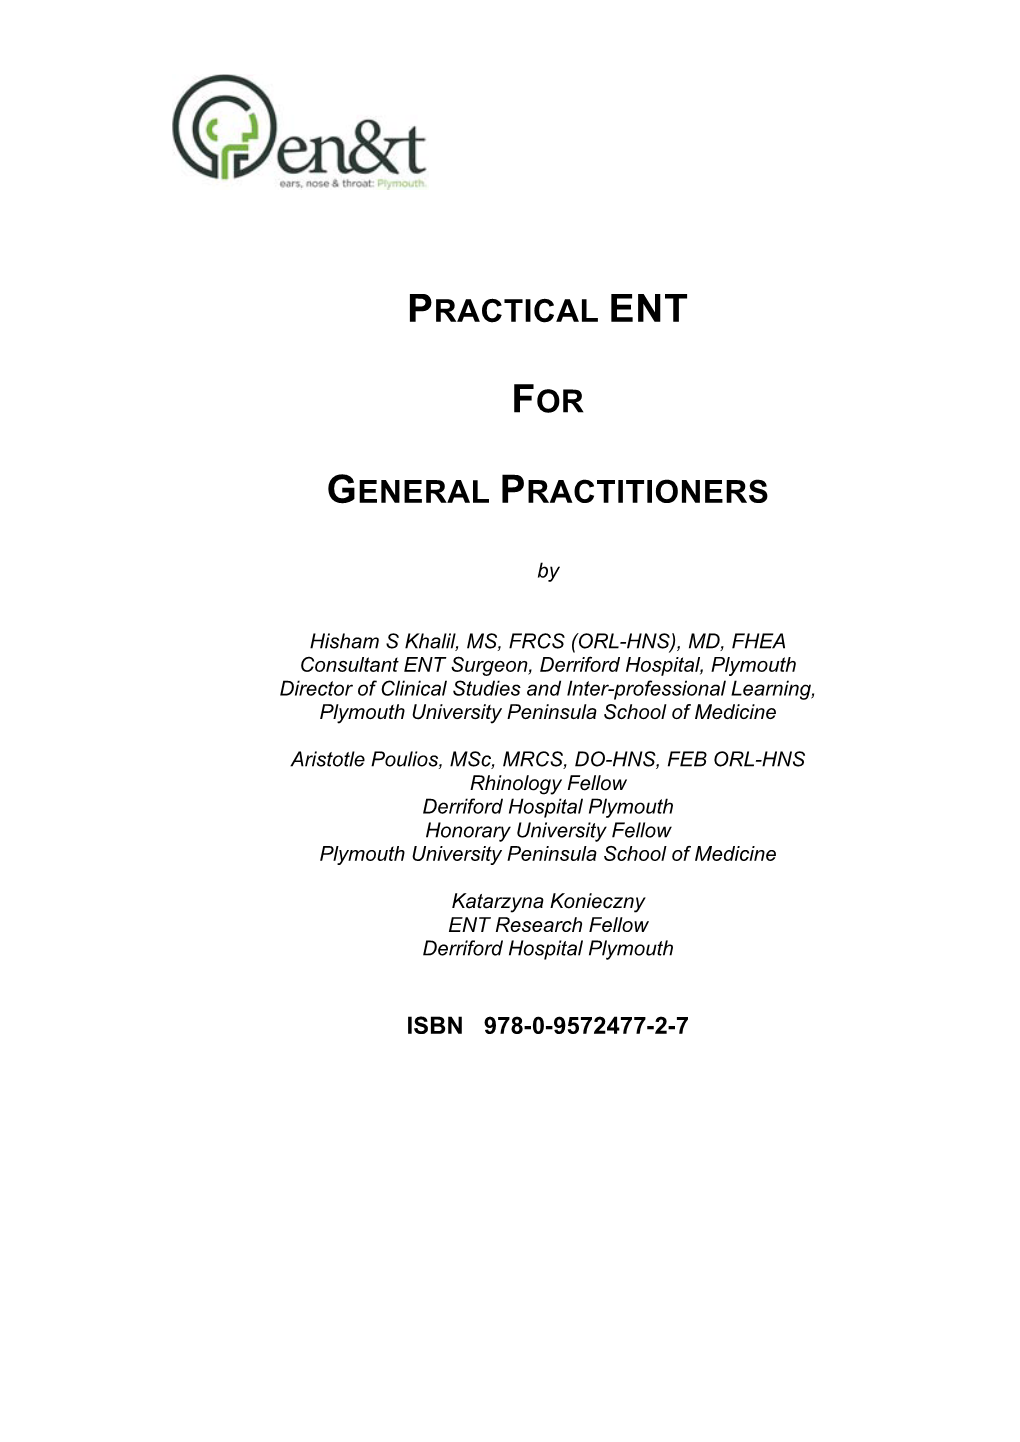 Practical Ent for General Practitioners